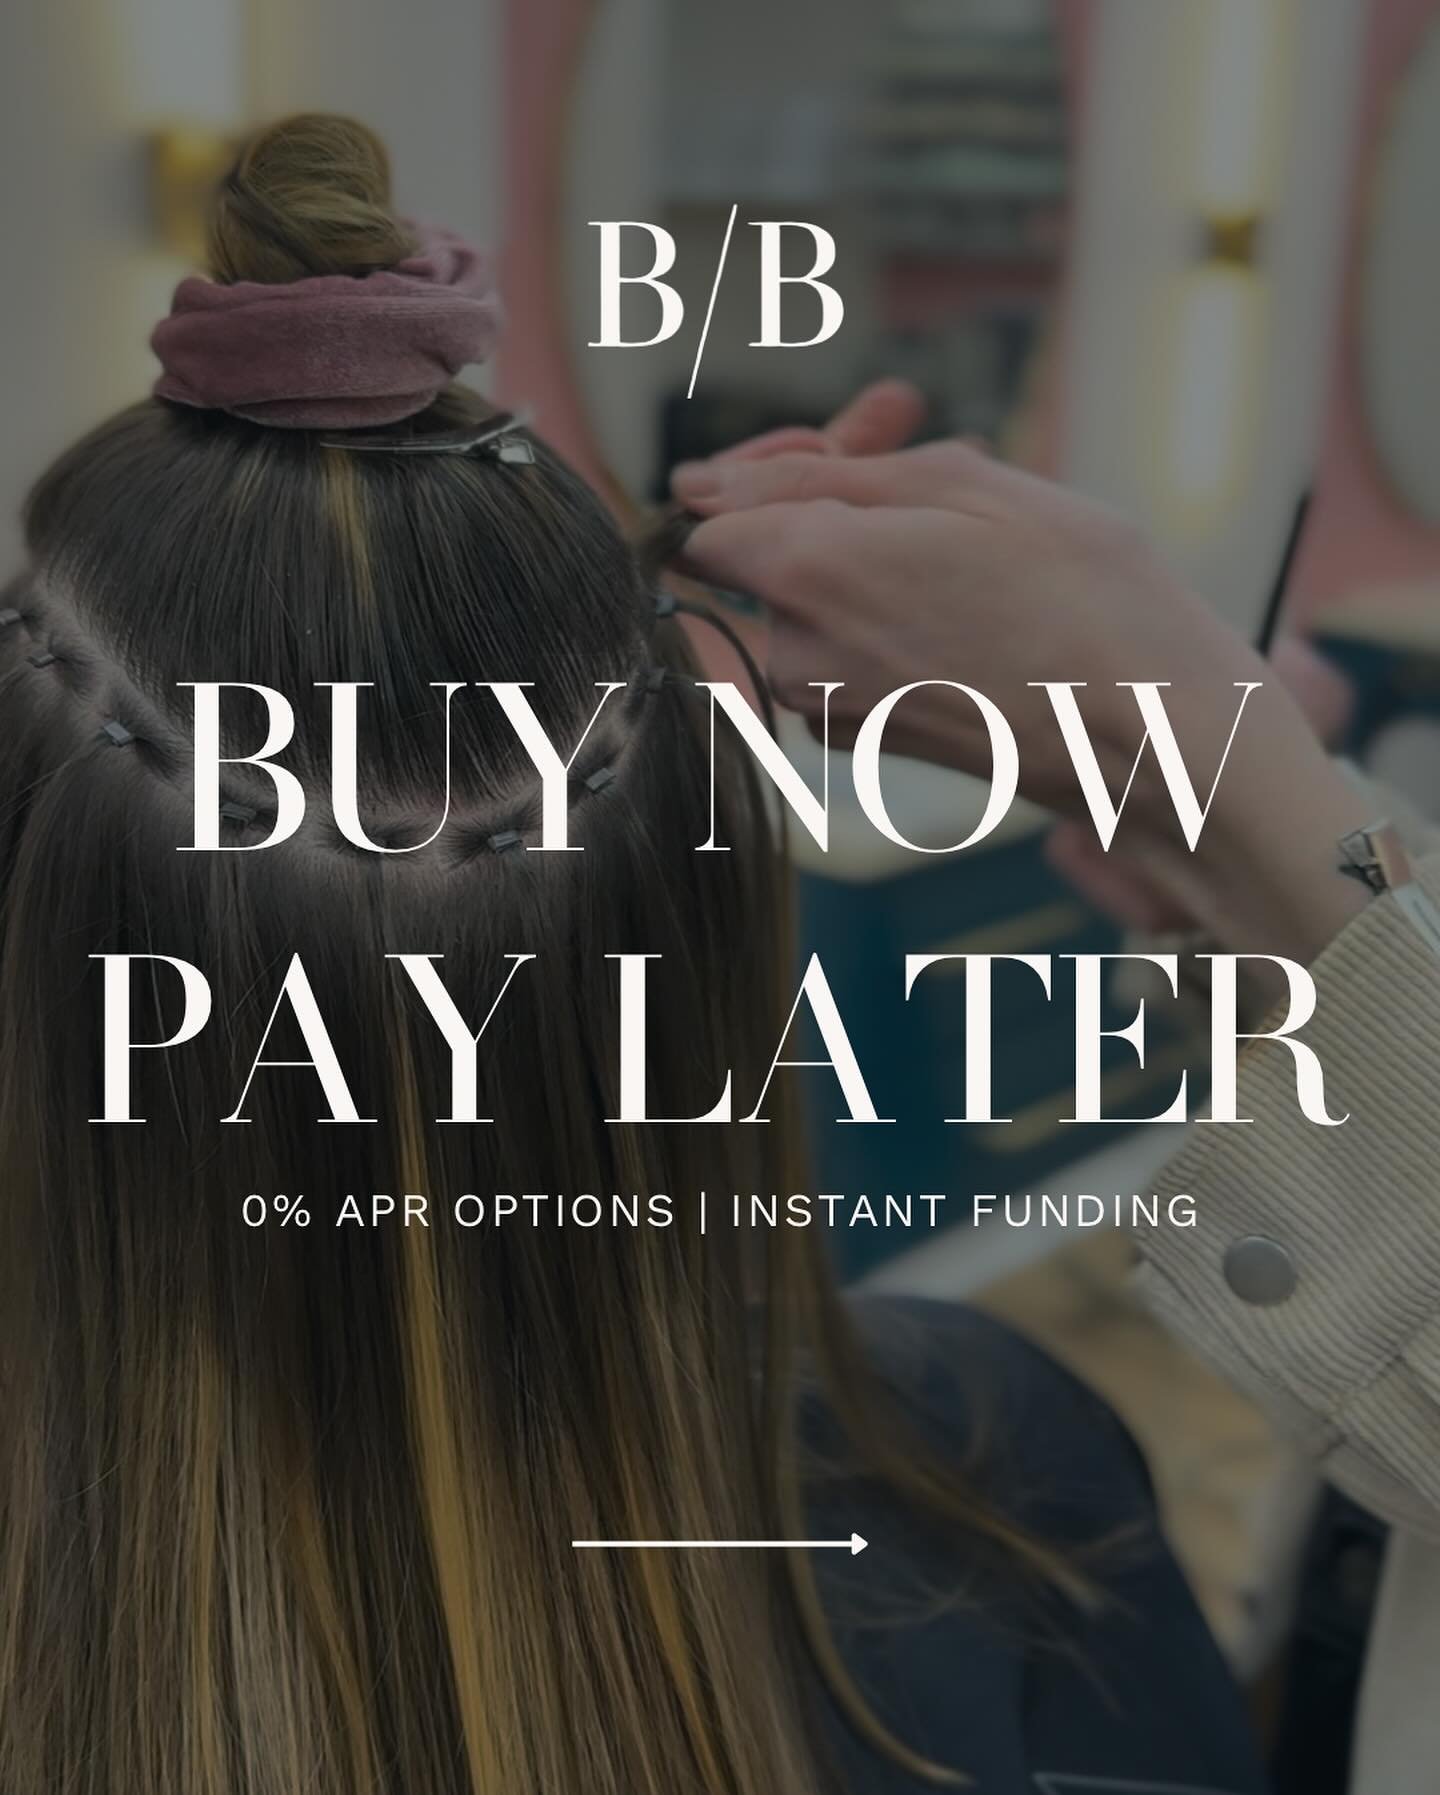 𝐘𝐨𝐮 𝐝𝐞𝐬𝐞𝐫𝐯𝐞 𝐲𝐨𝐮𝐫 𝐝𝐫𝐞𝐚𝐦 𝐡𝐚𝐢𝐫 ✨ 𝐍 𝐎 𝐖 ✨

The investment of new hair can be premium, especially when you&rsquo;re in need of a hair loss solution or hair volumizing treatment. We are so excited to tell you, we now offer service